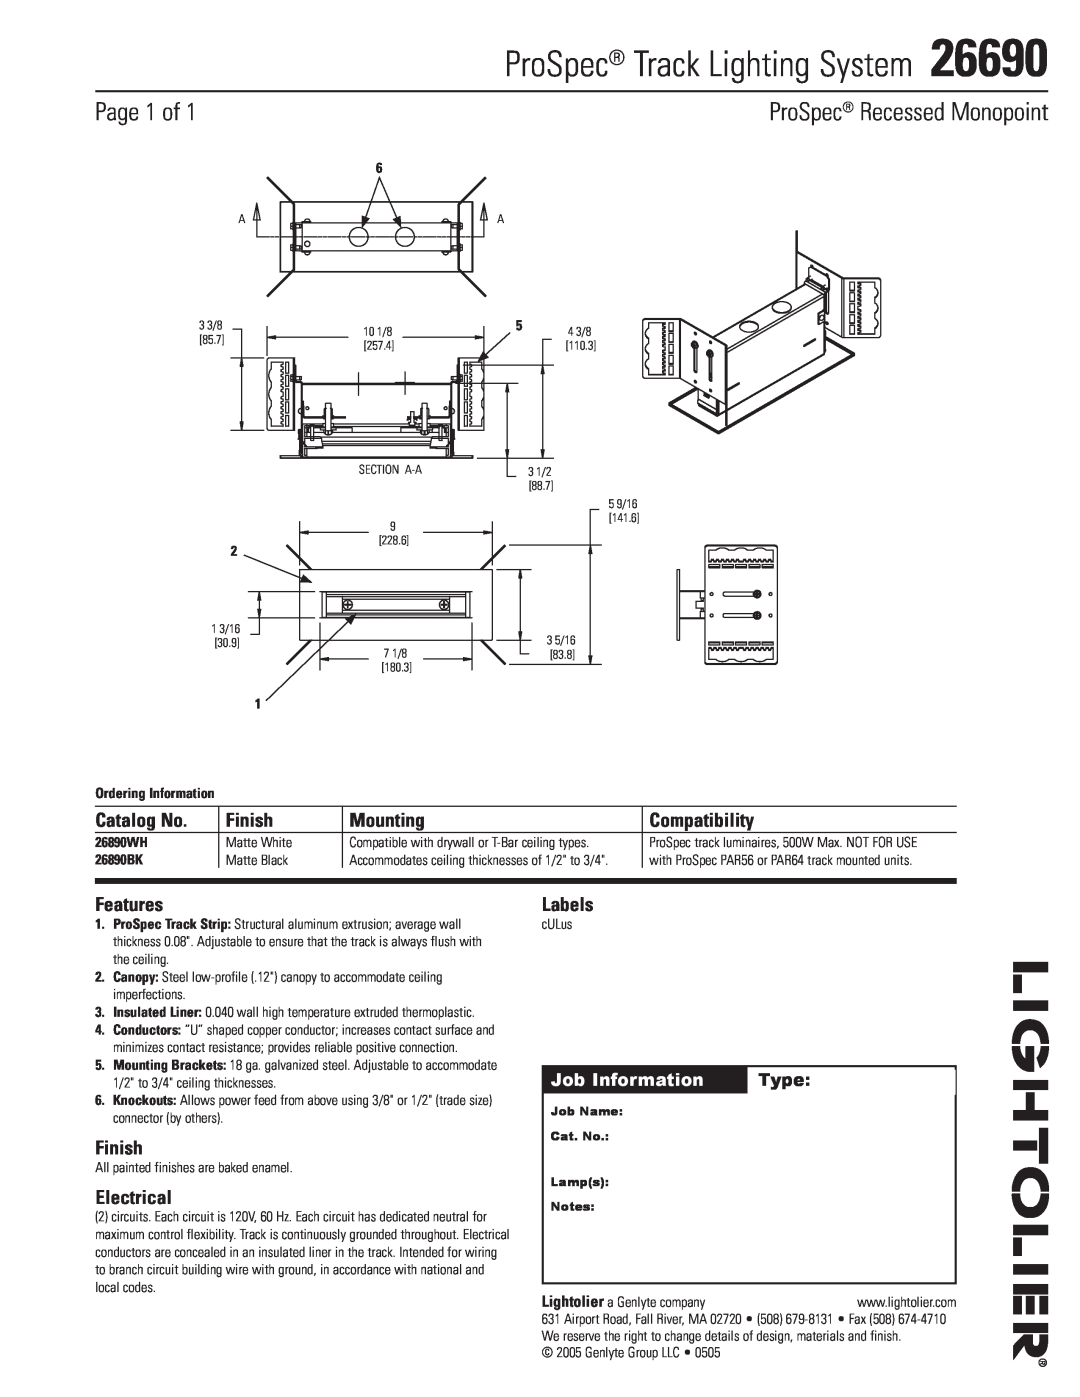 Lightolier 26690 manual ProSpec Track Lighting System, Page 1 of, ProSpec Recessed Monopoint, Catalog No, Finish, Mounting 